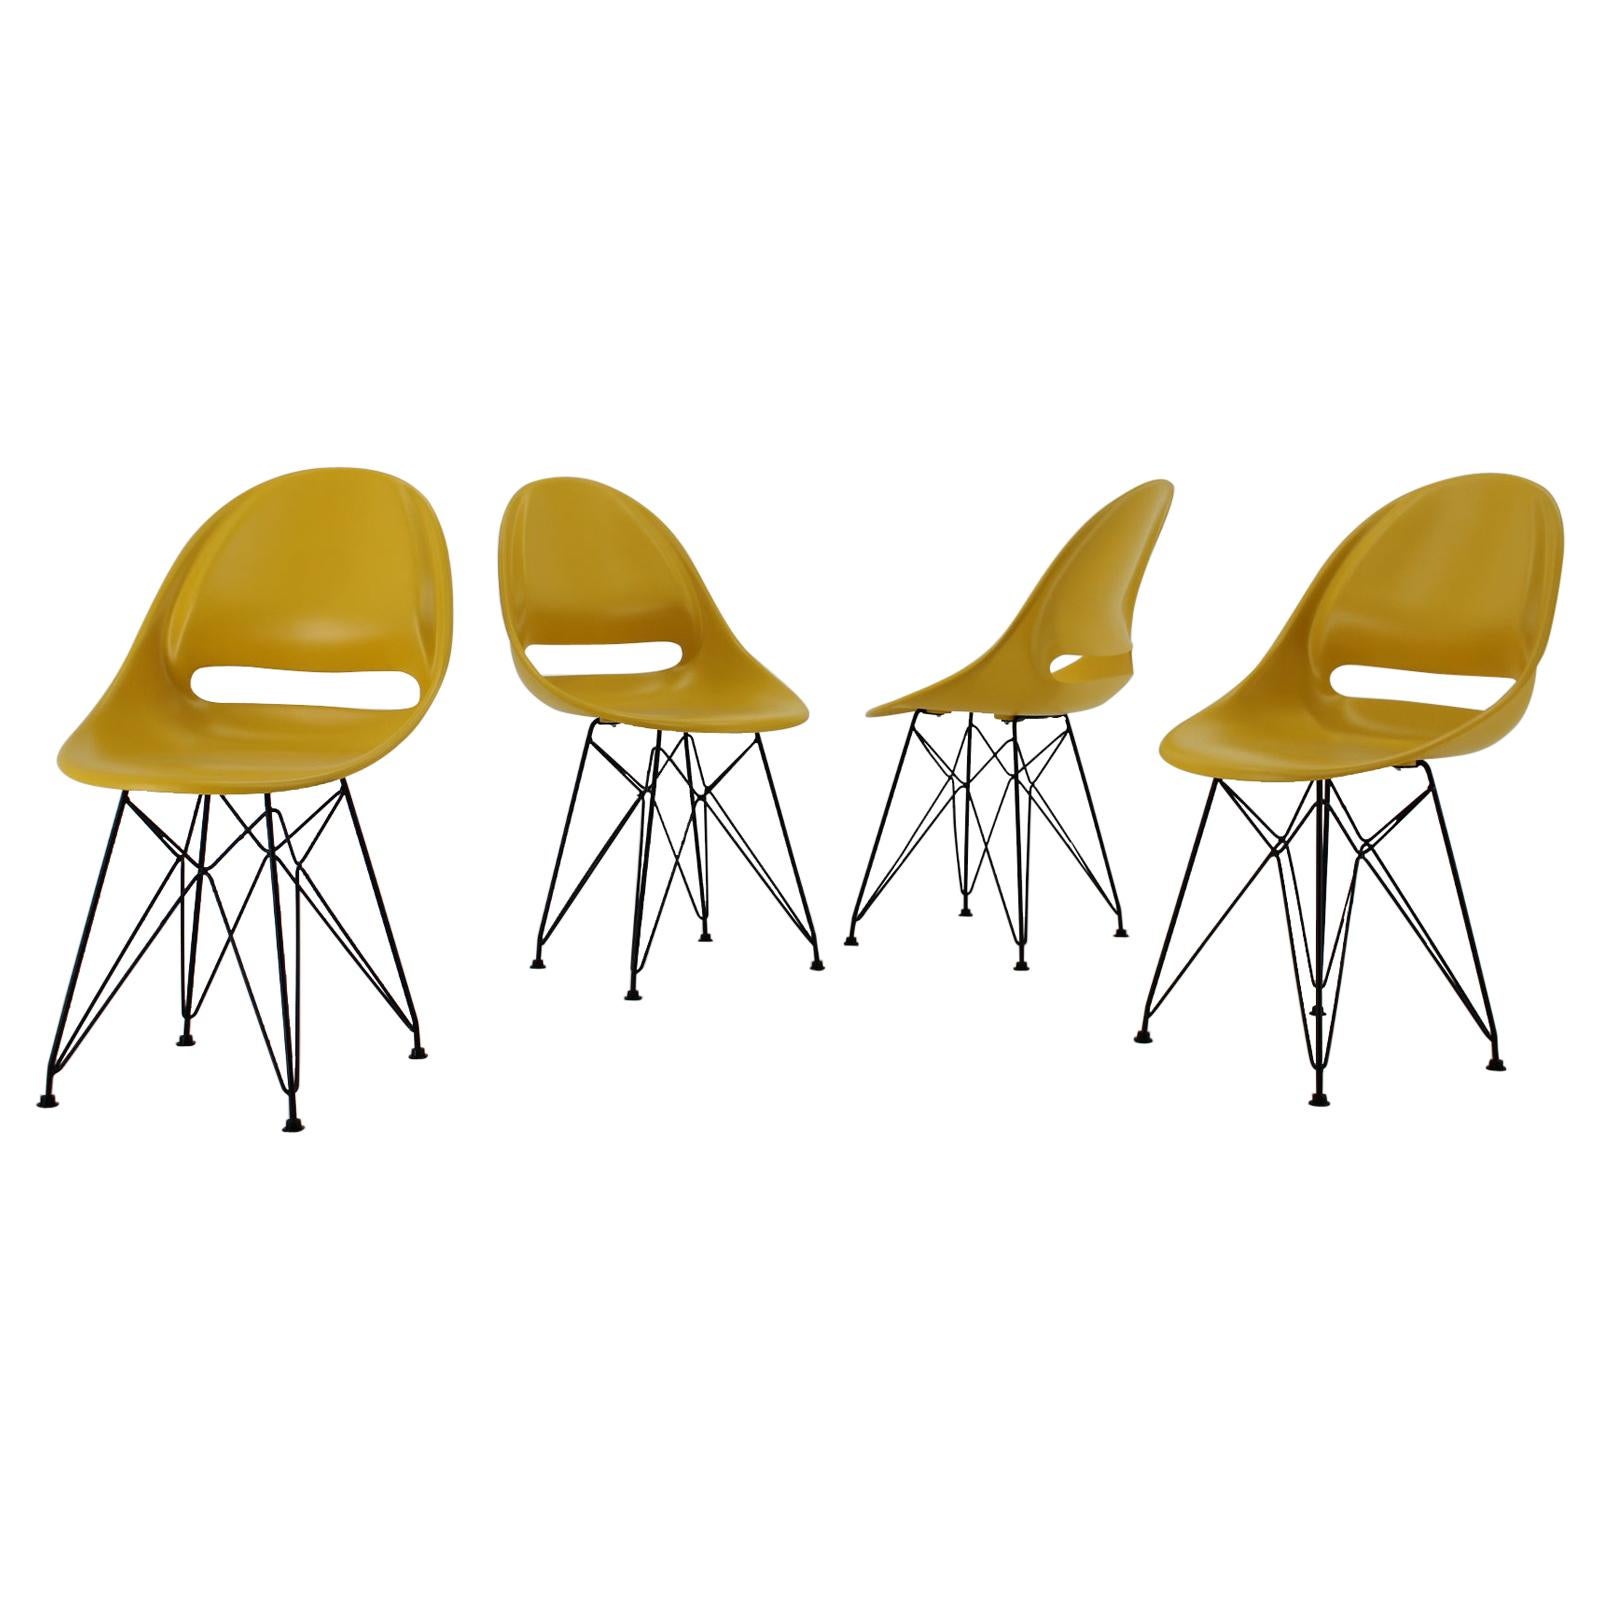 Set of 4 Midcentury Yellow Design Fiberglass Dining Chairs by M.Navratil, 1960s For Sale